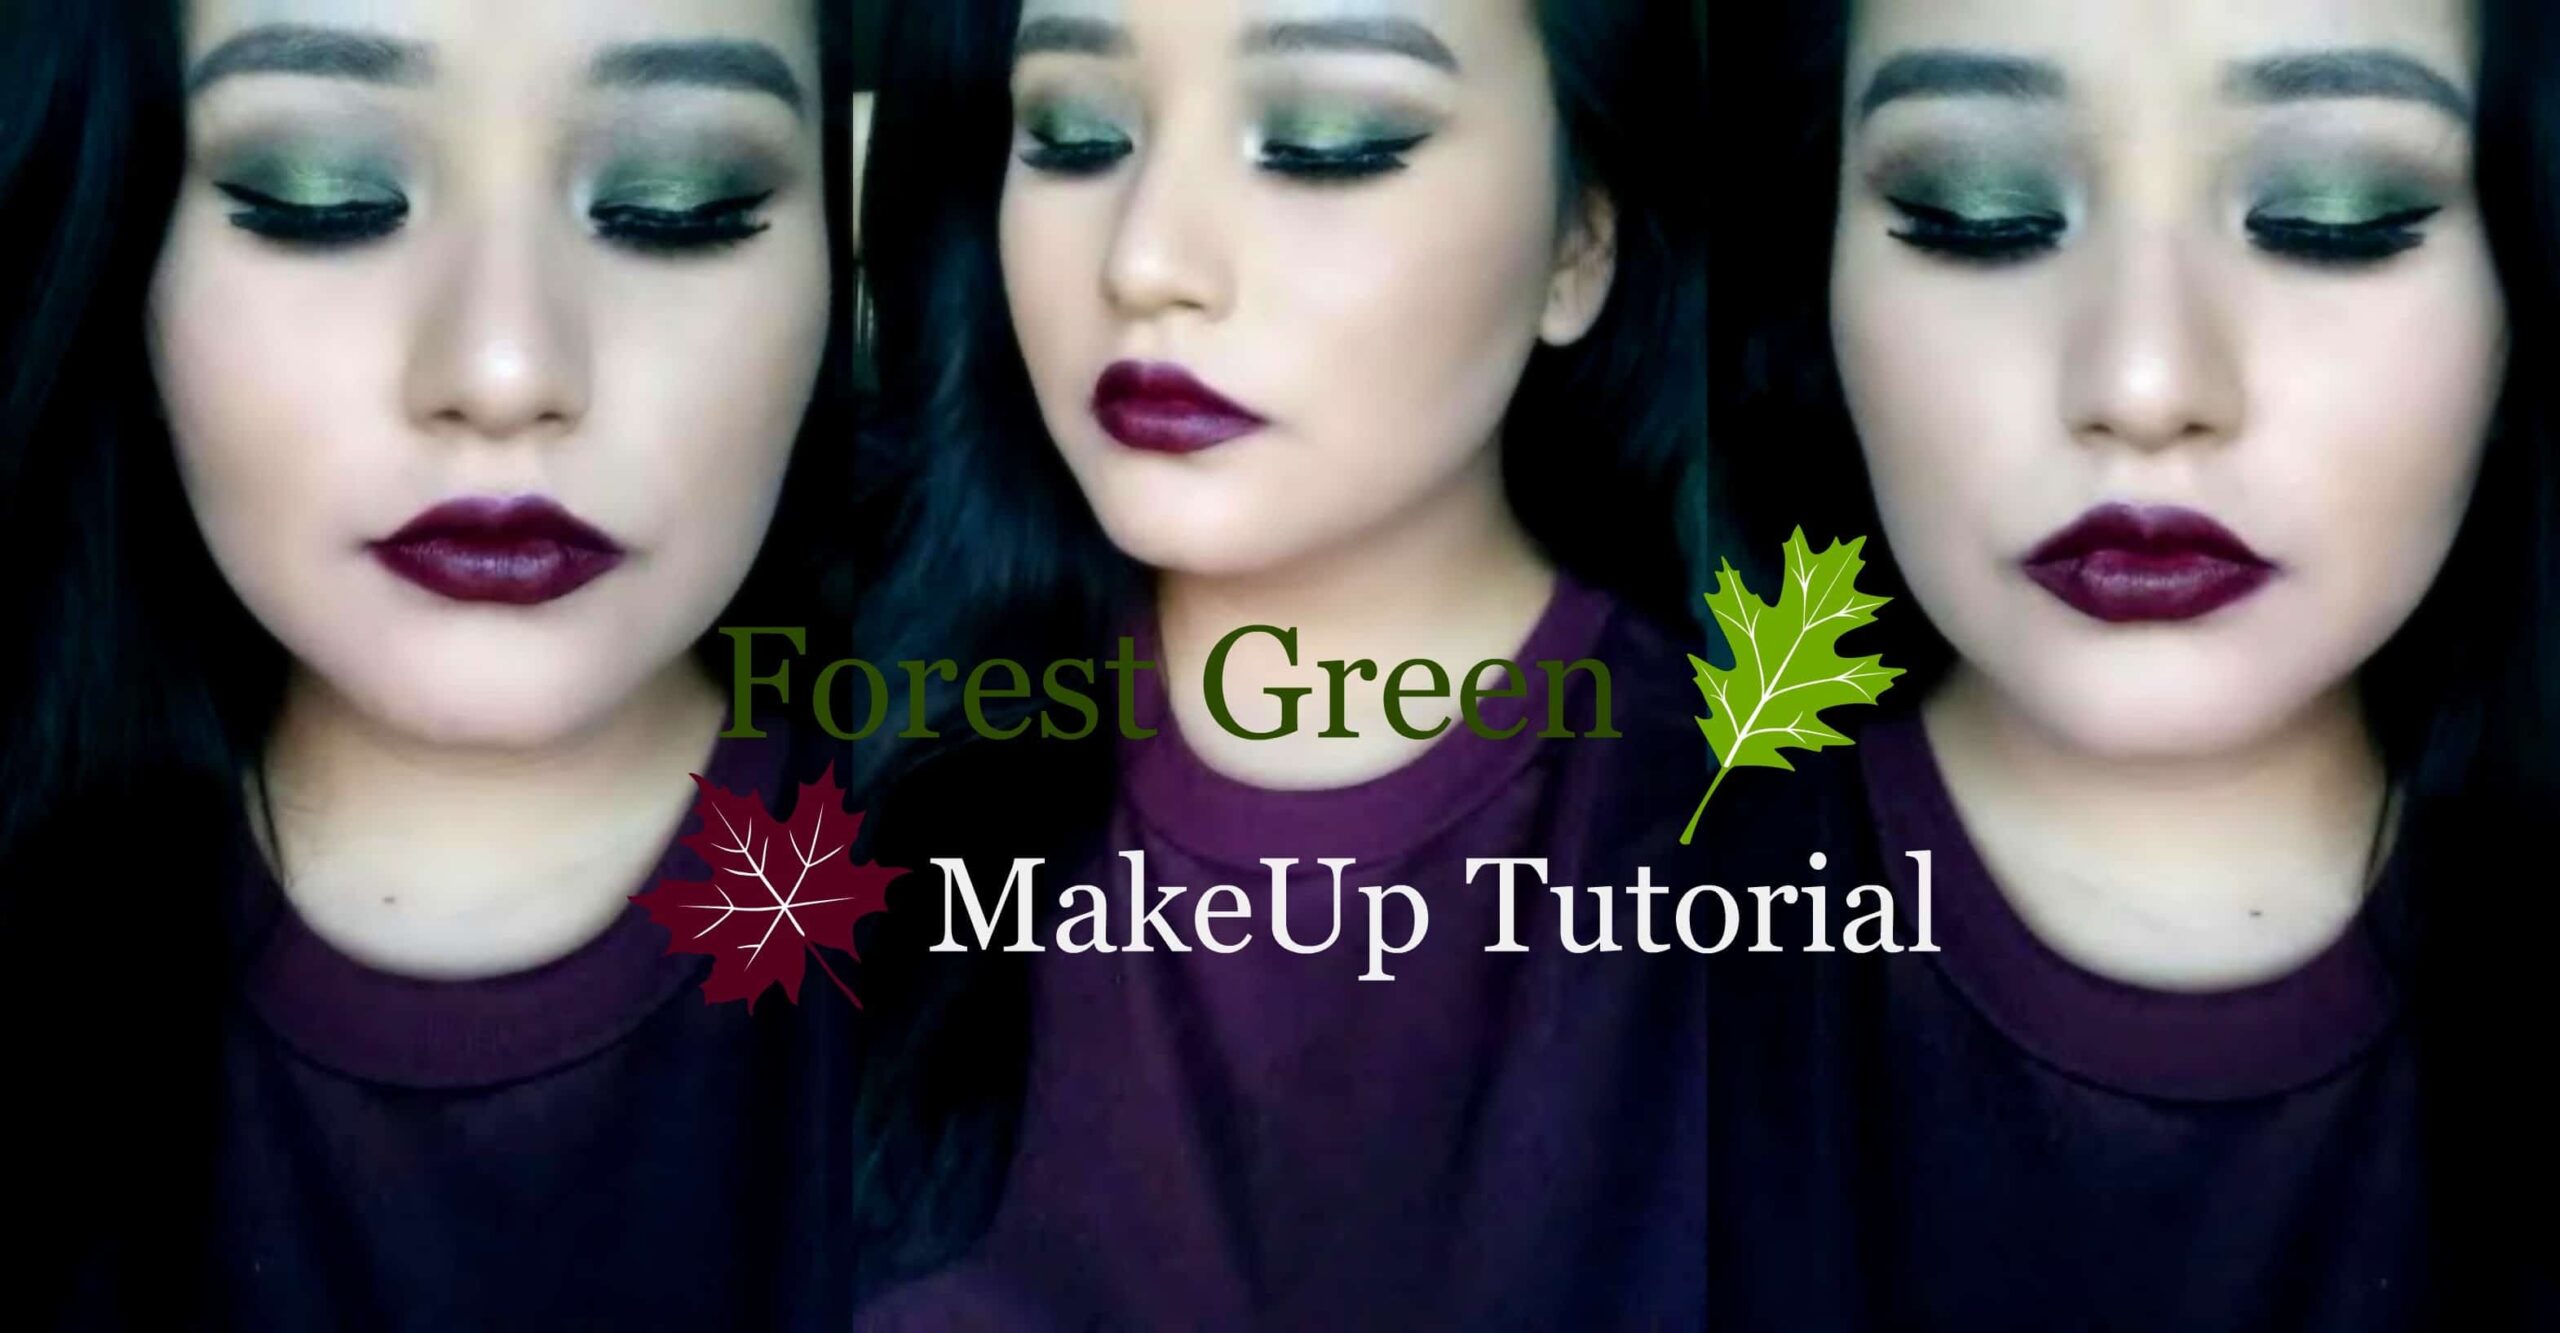 Gorgeous makeup is suitable for people who like green!